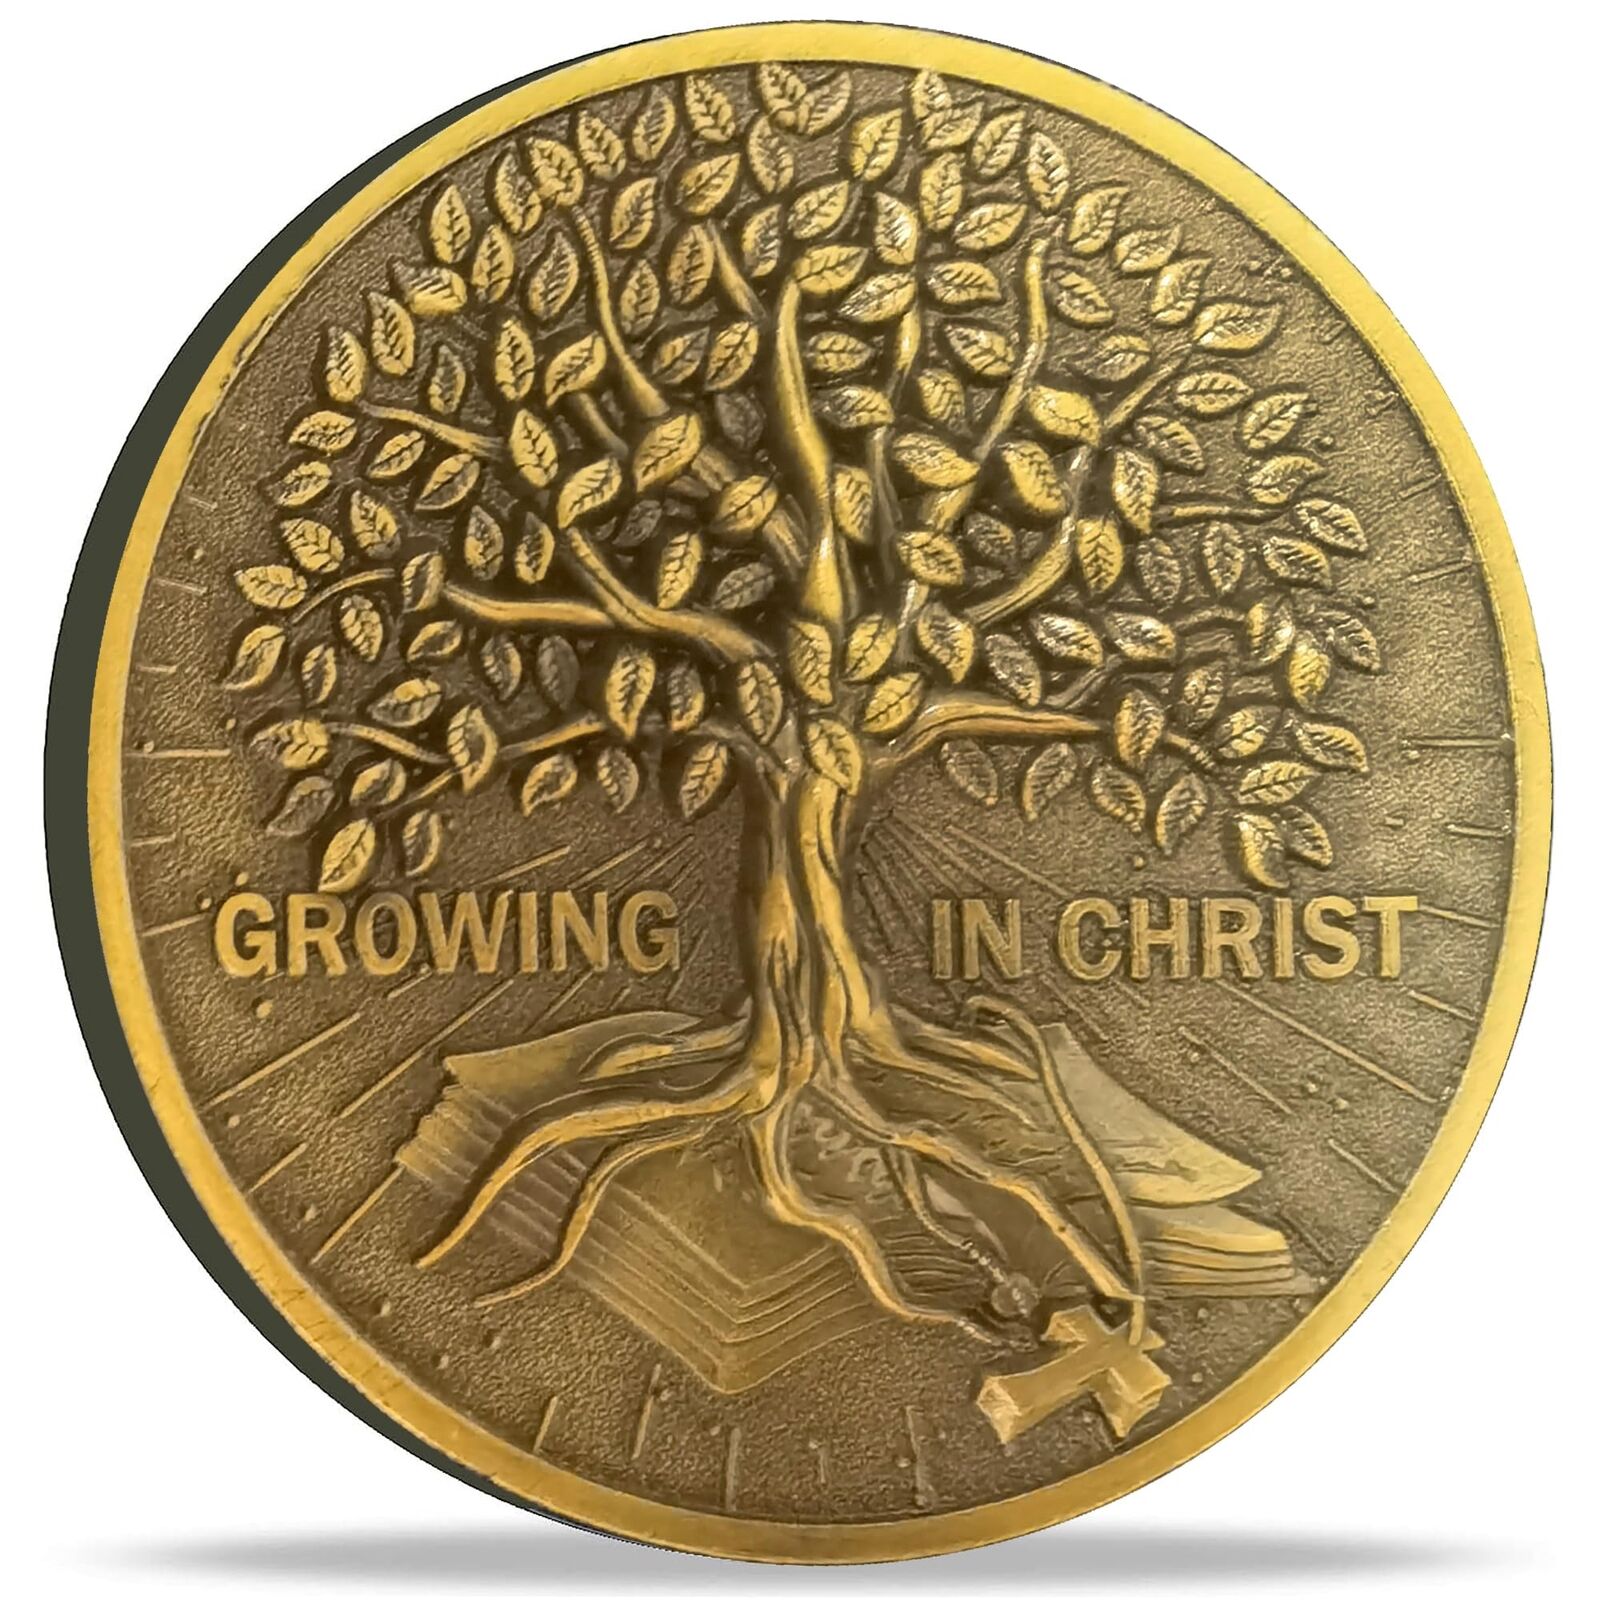 Growing in Christ Antique Gold Christian Challenge Coin Bible Verse Pocket